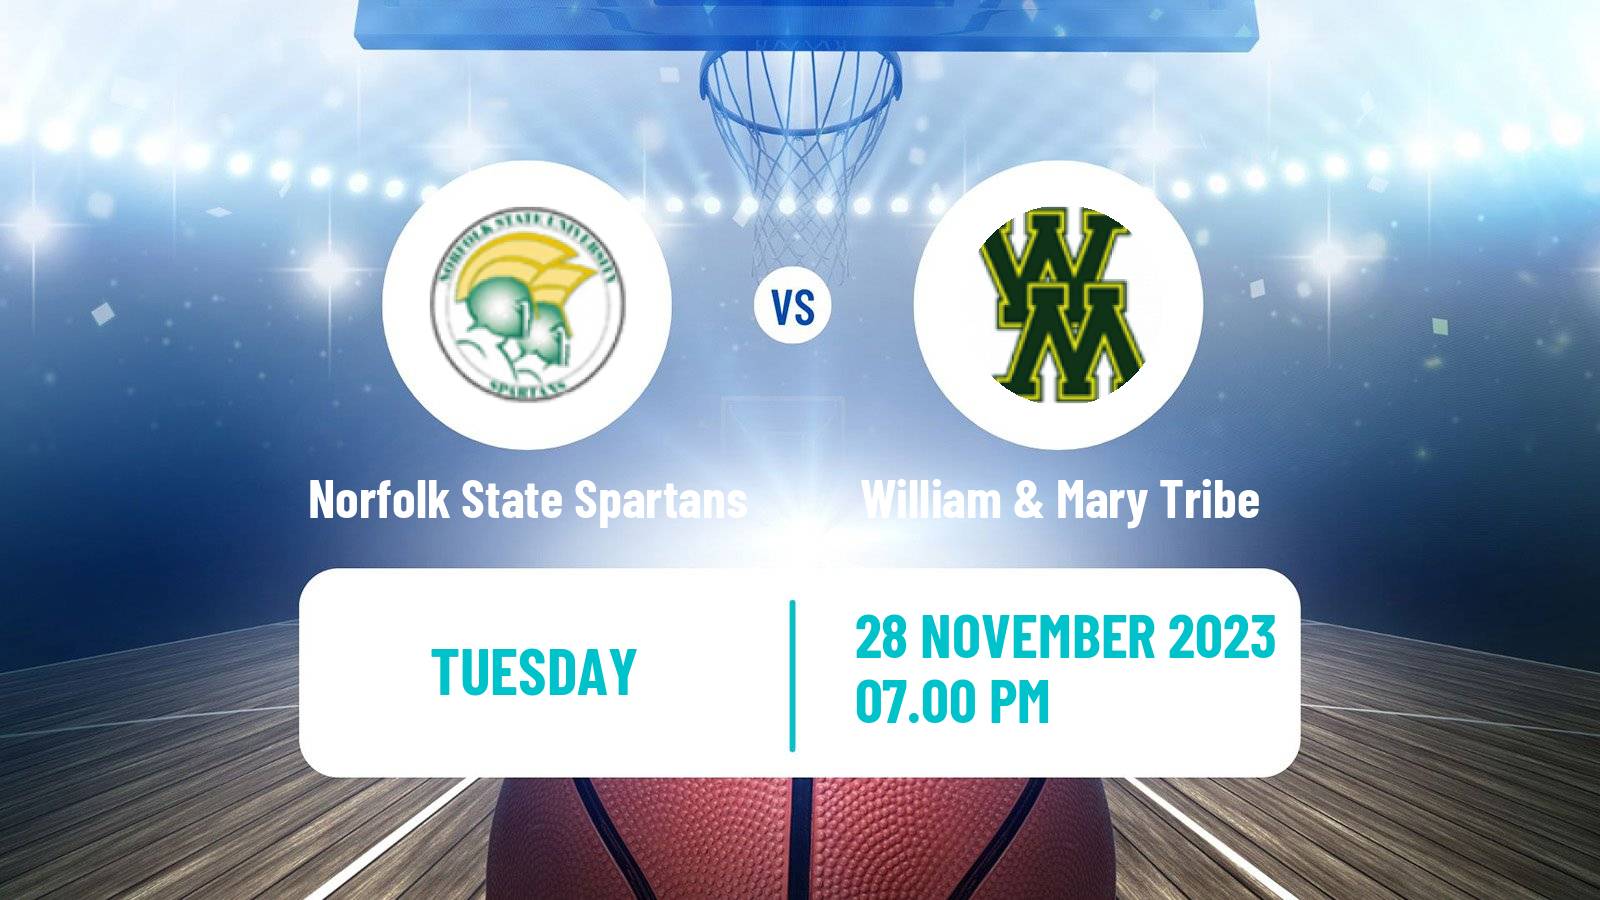 Basketball NCAA College Basketball Norfolk State Spartans - William & Mary Tribe